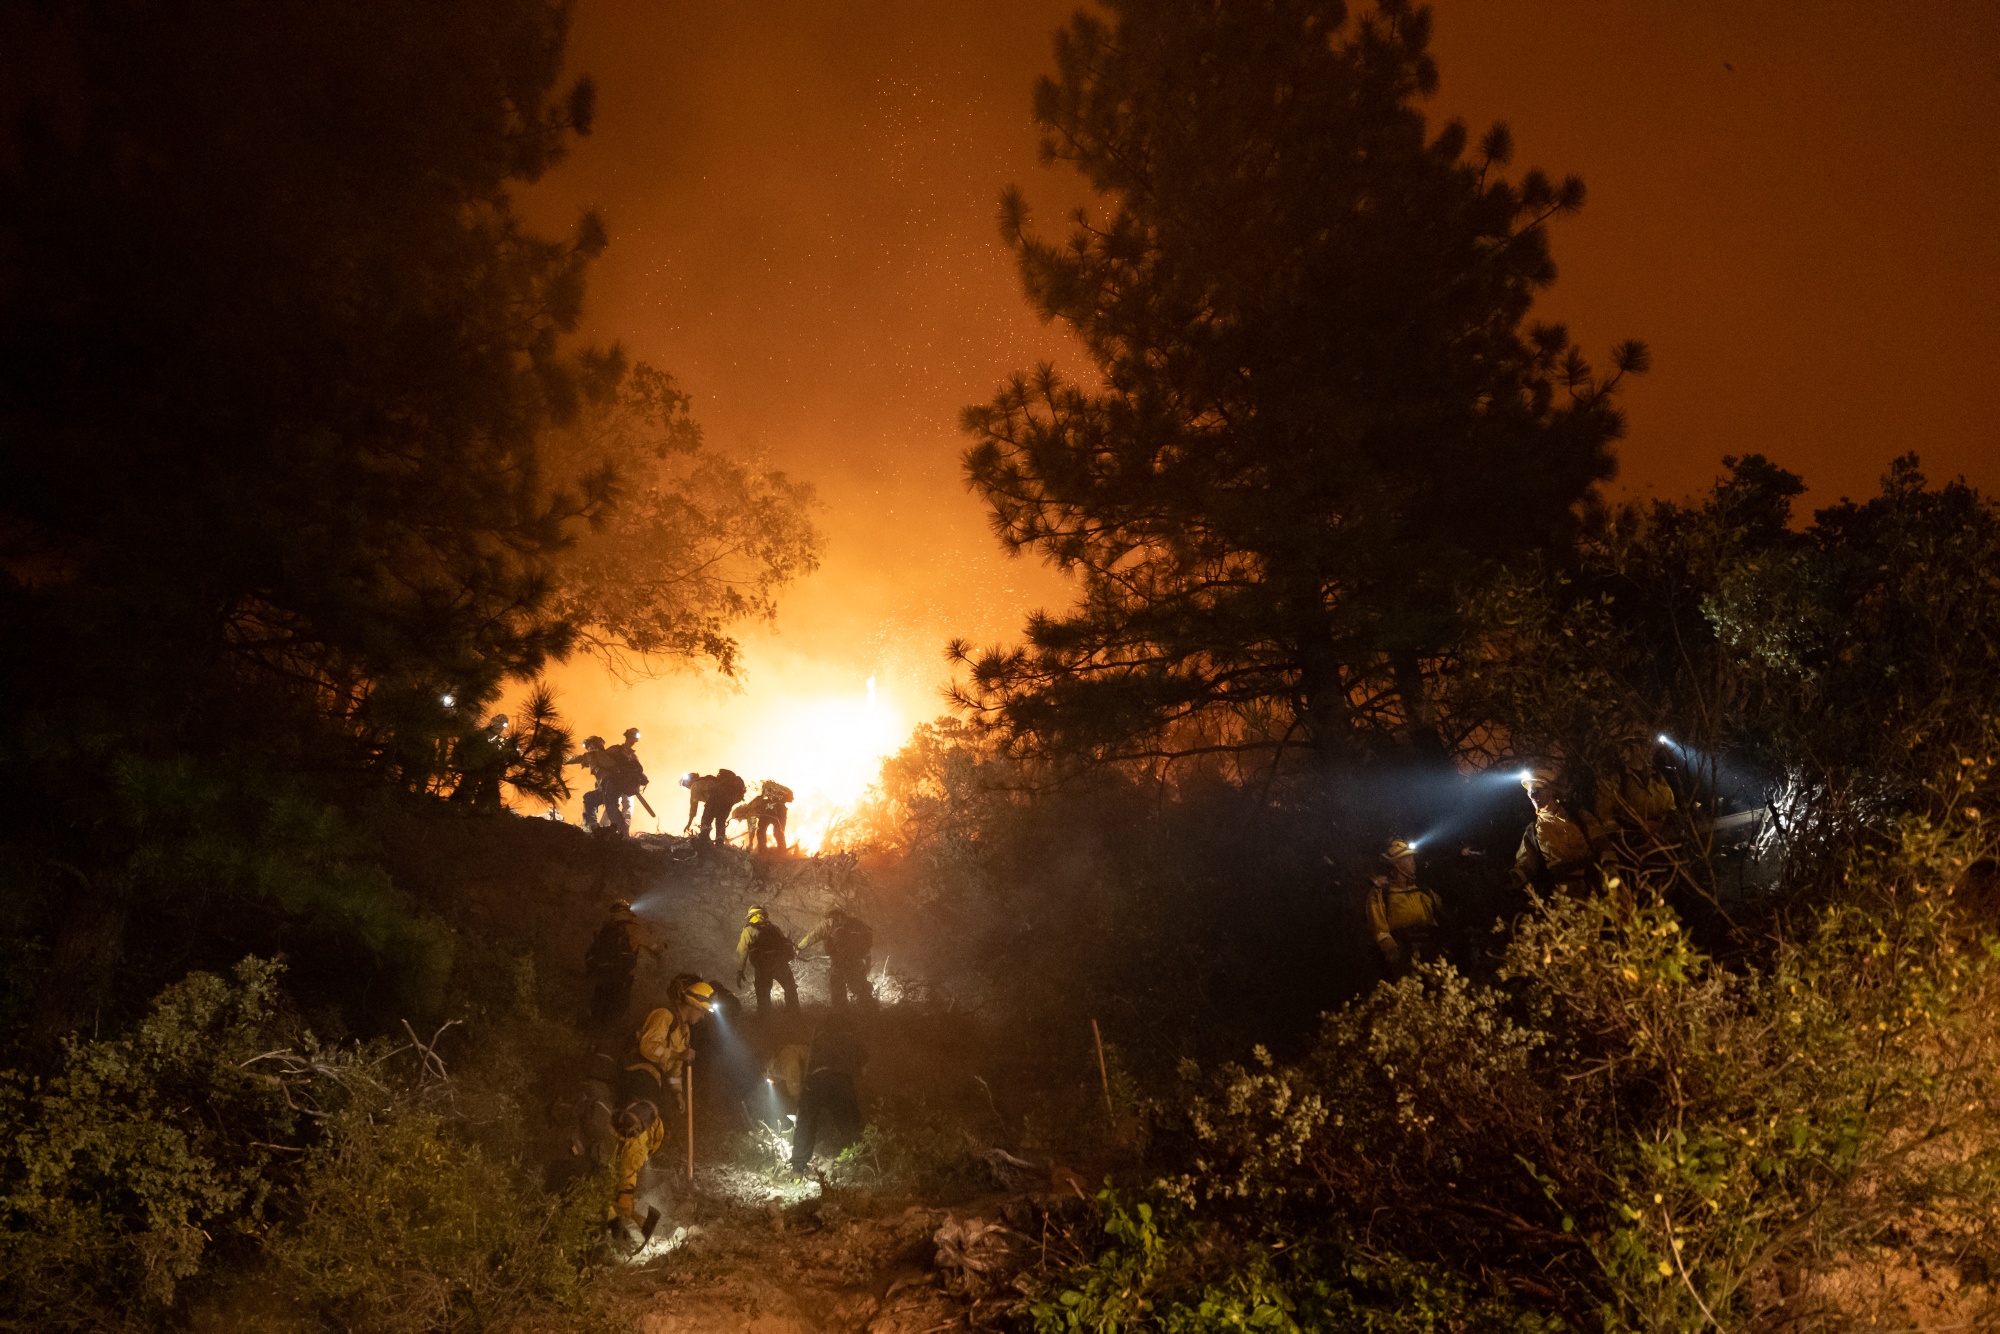 Firefighters saw trees on a hillside in order to open the path for bulldozers during the Mosquito Fire near Foresthill, California, on Sept. 7.